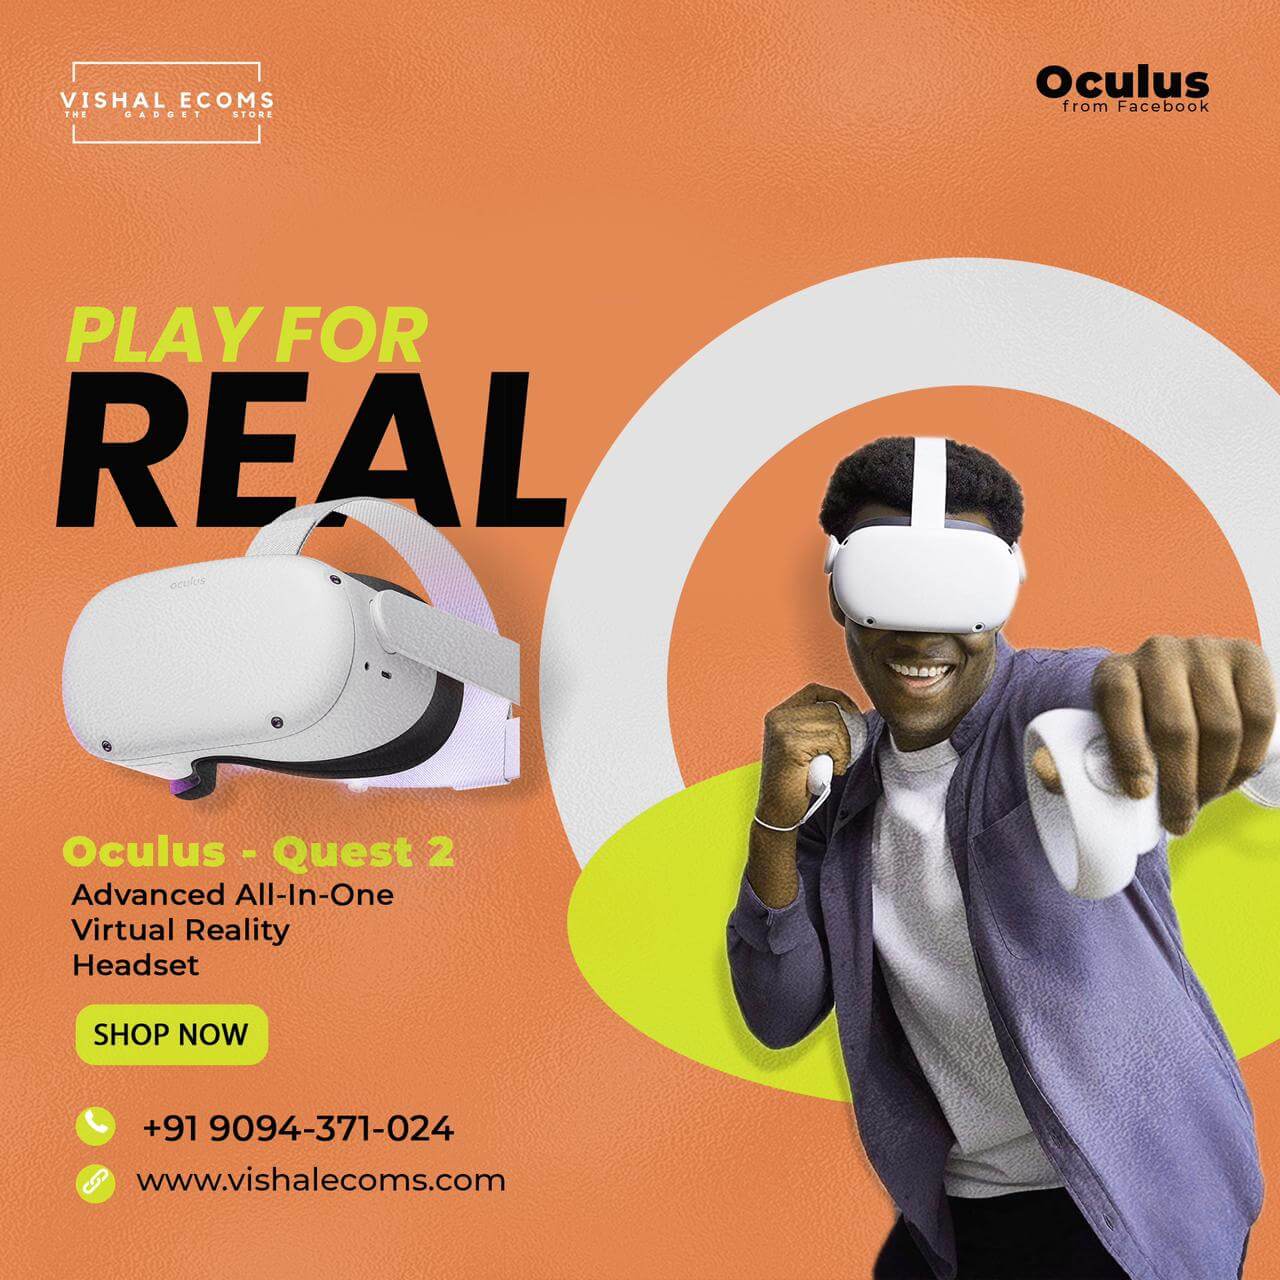 Buy Oculus Quest 2 by Facebook Advanced All-In-One Virtual Reality